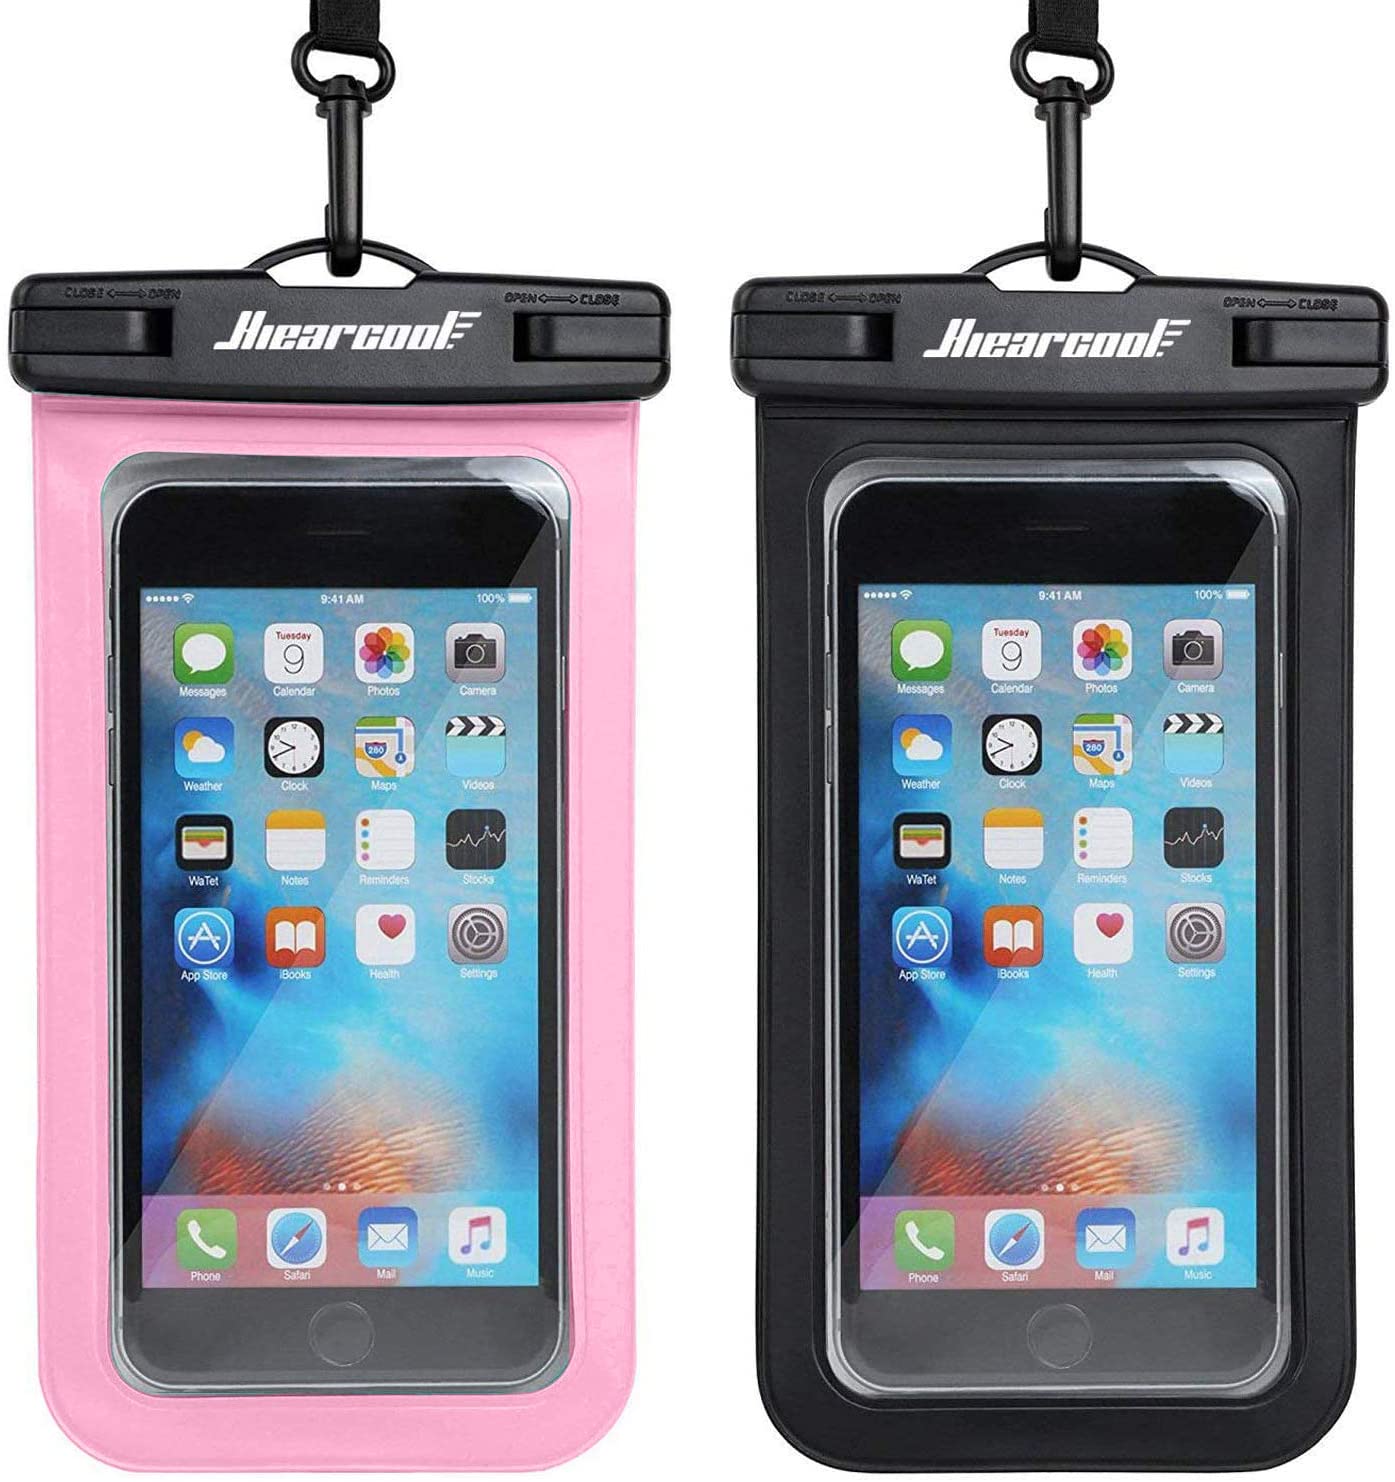 Universal Waterproof Case,Waterproof Phone Pouch Compatible for iPhone 13 12 11 Pro Max XS Max XR X 8 7 Samsung Galaxy s10/s9 Google Pixel 2 HTC Up to 7.0